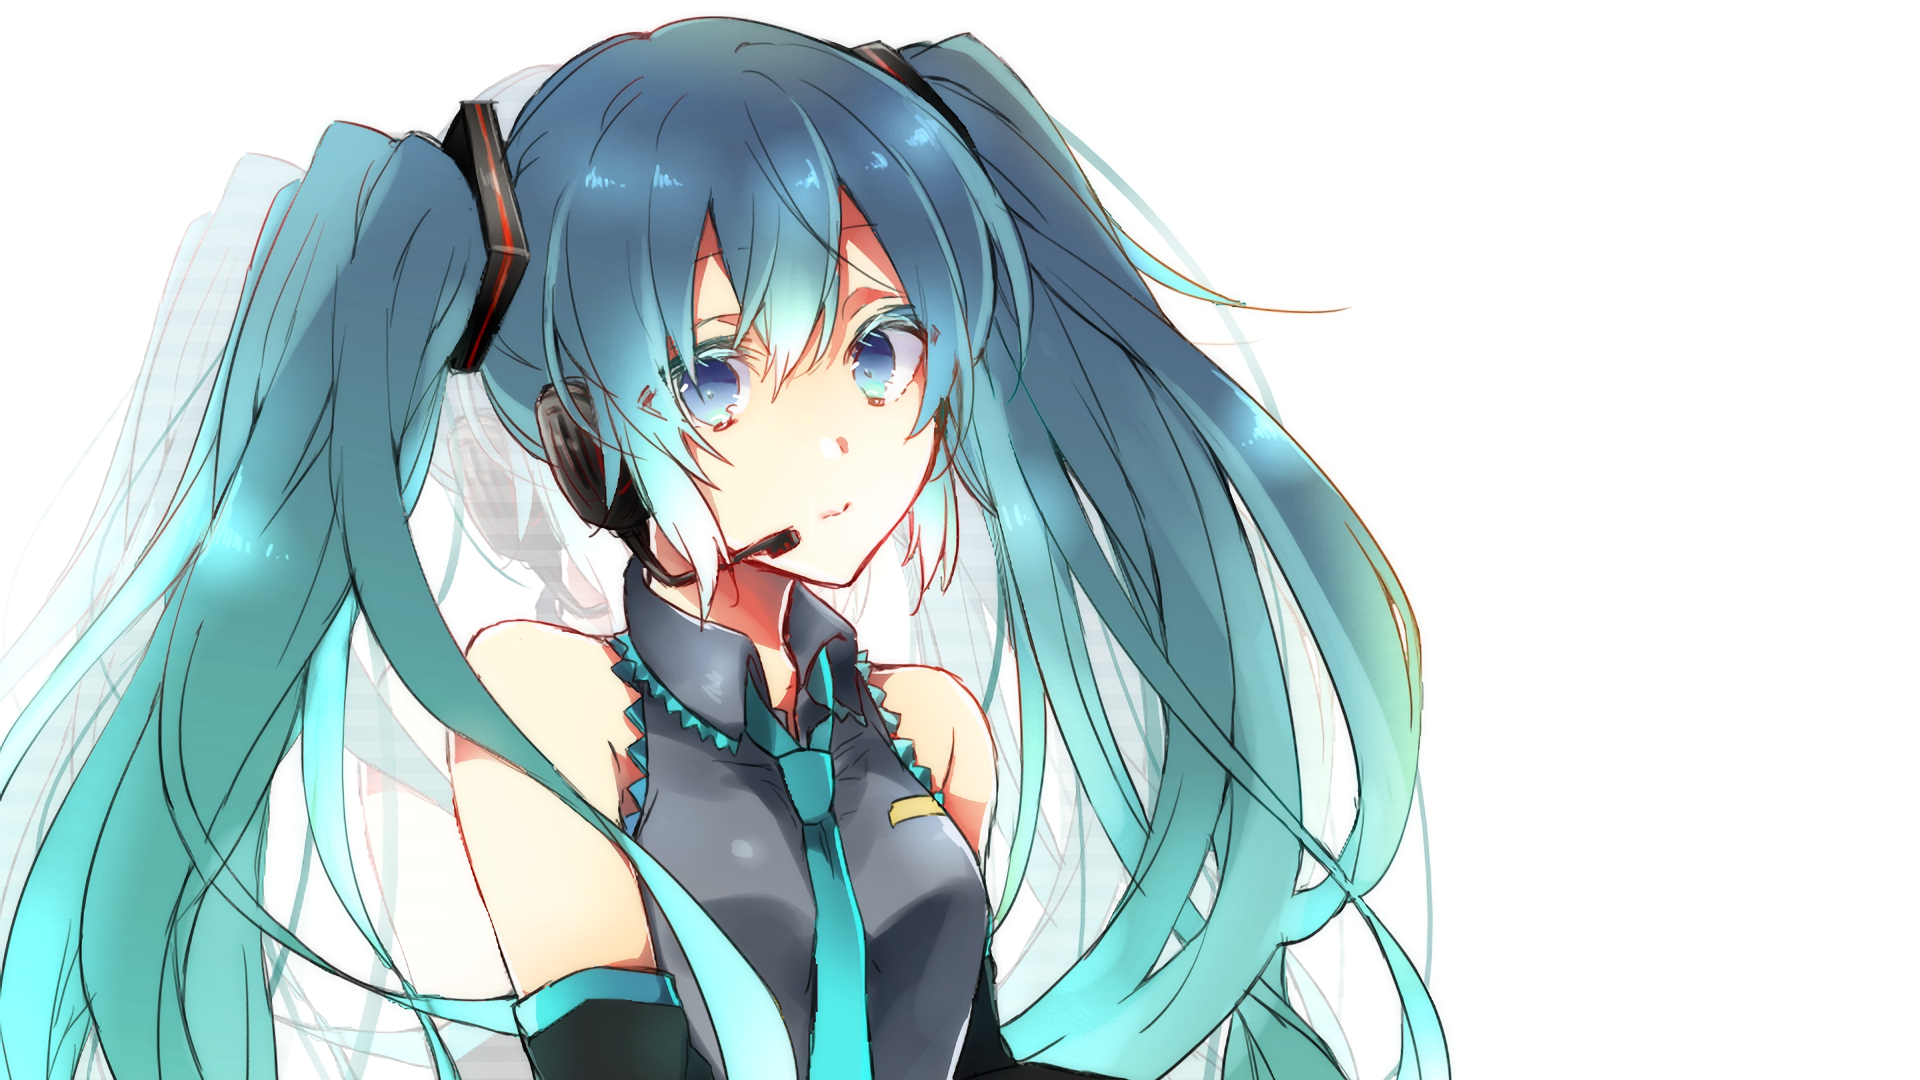 Anime 1920x1080 Vocaloid Hatsune Miku anime girls anime simple background blue eyes tie cyan hair women headsets white background long hair looking at viewer